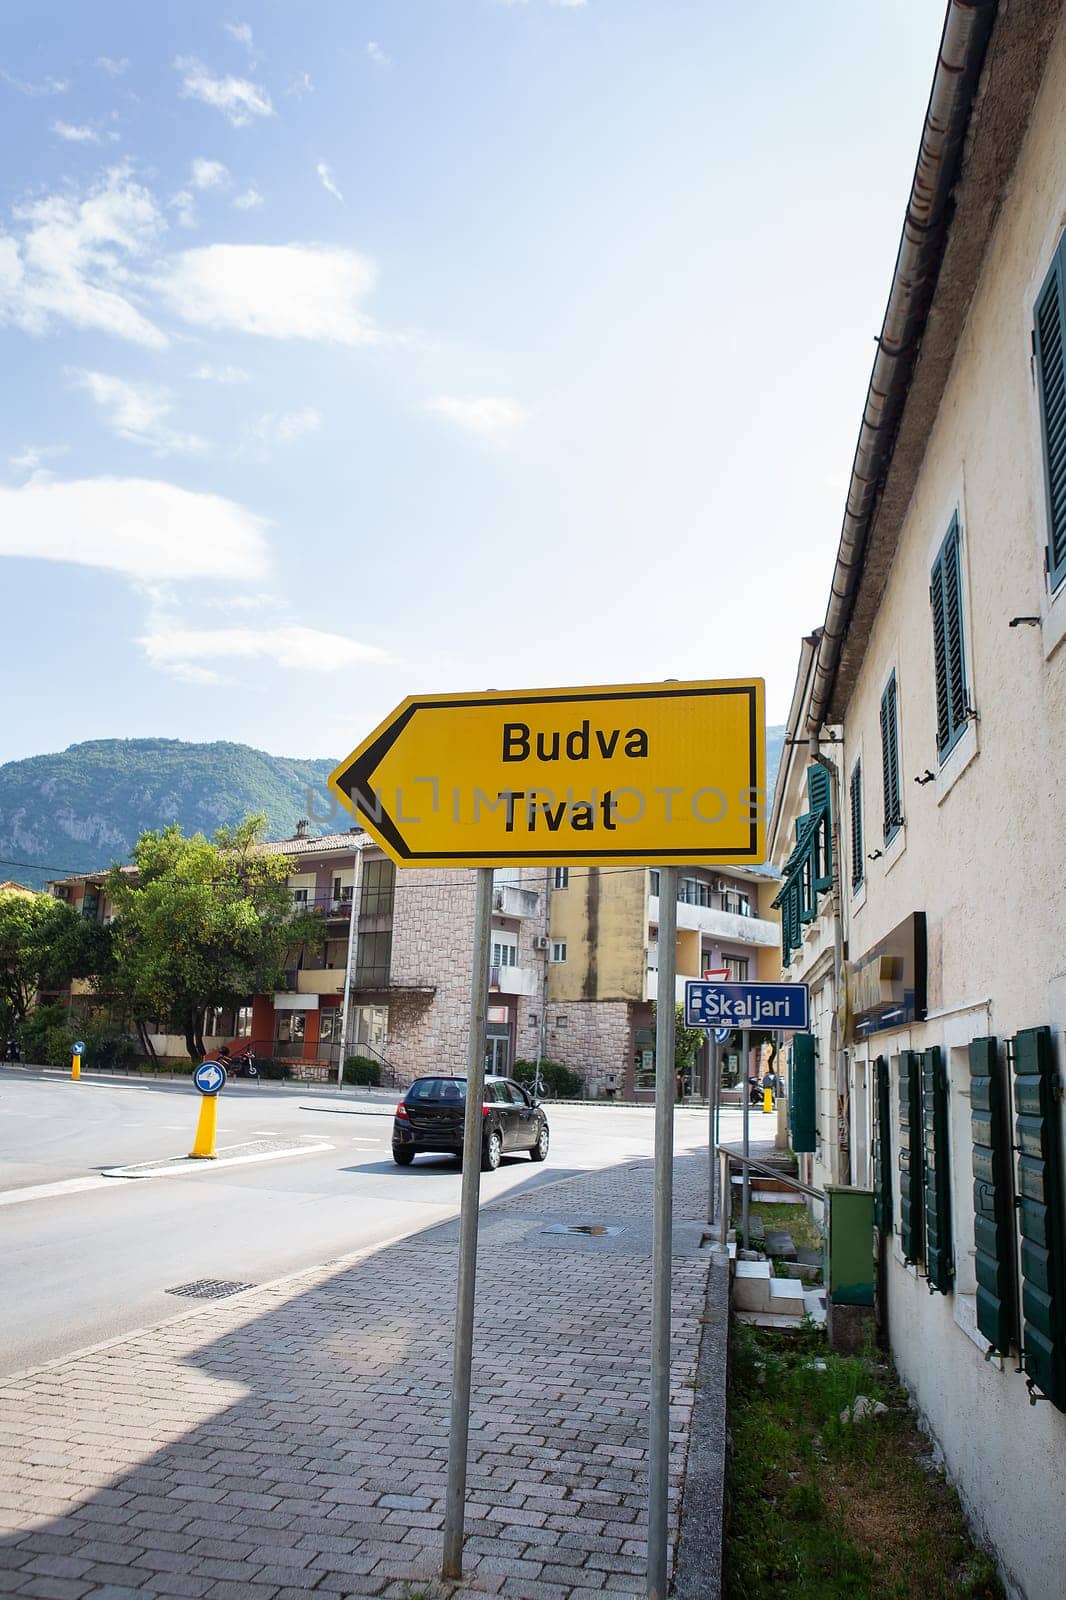 Photo of a road sign with the inscription of the cities of Budva and Tivat 05. 07. 2021 Kotor, Montenegro. by sfinks